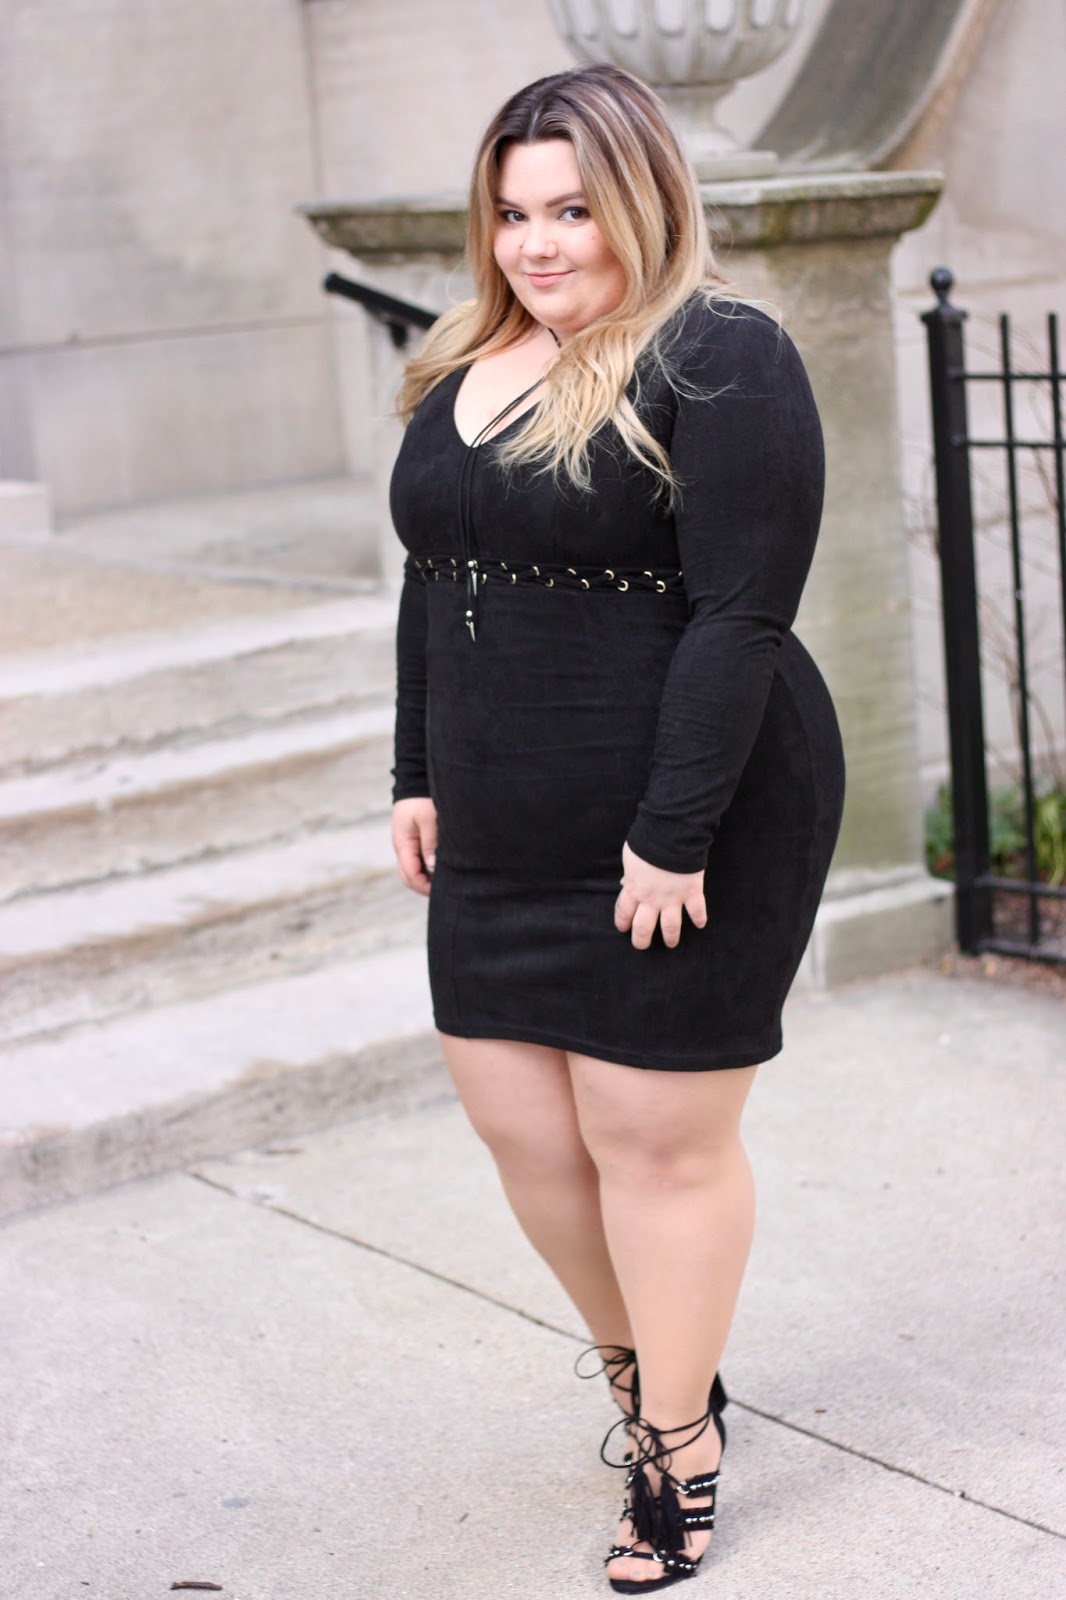 GET CURVY WITH IT — Natalie in the City